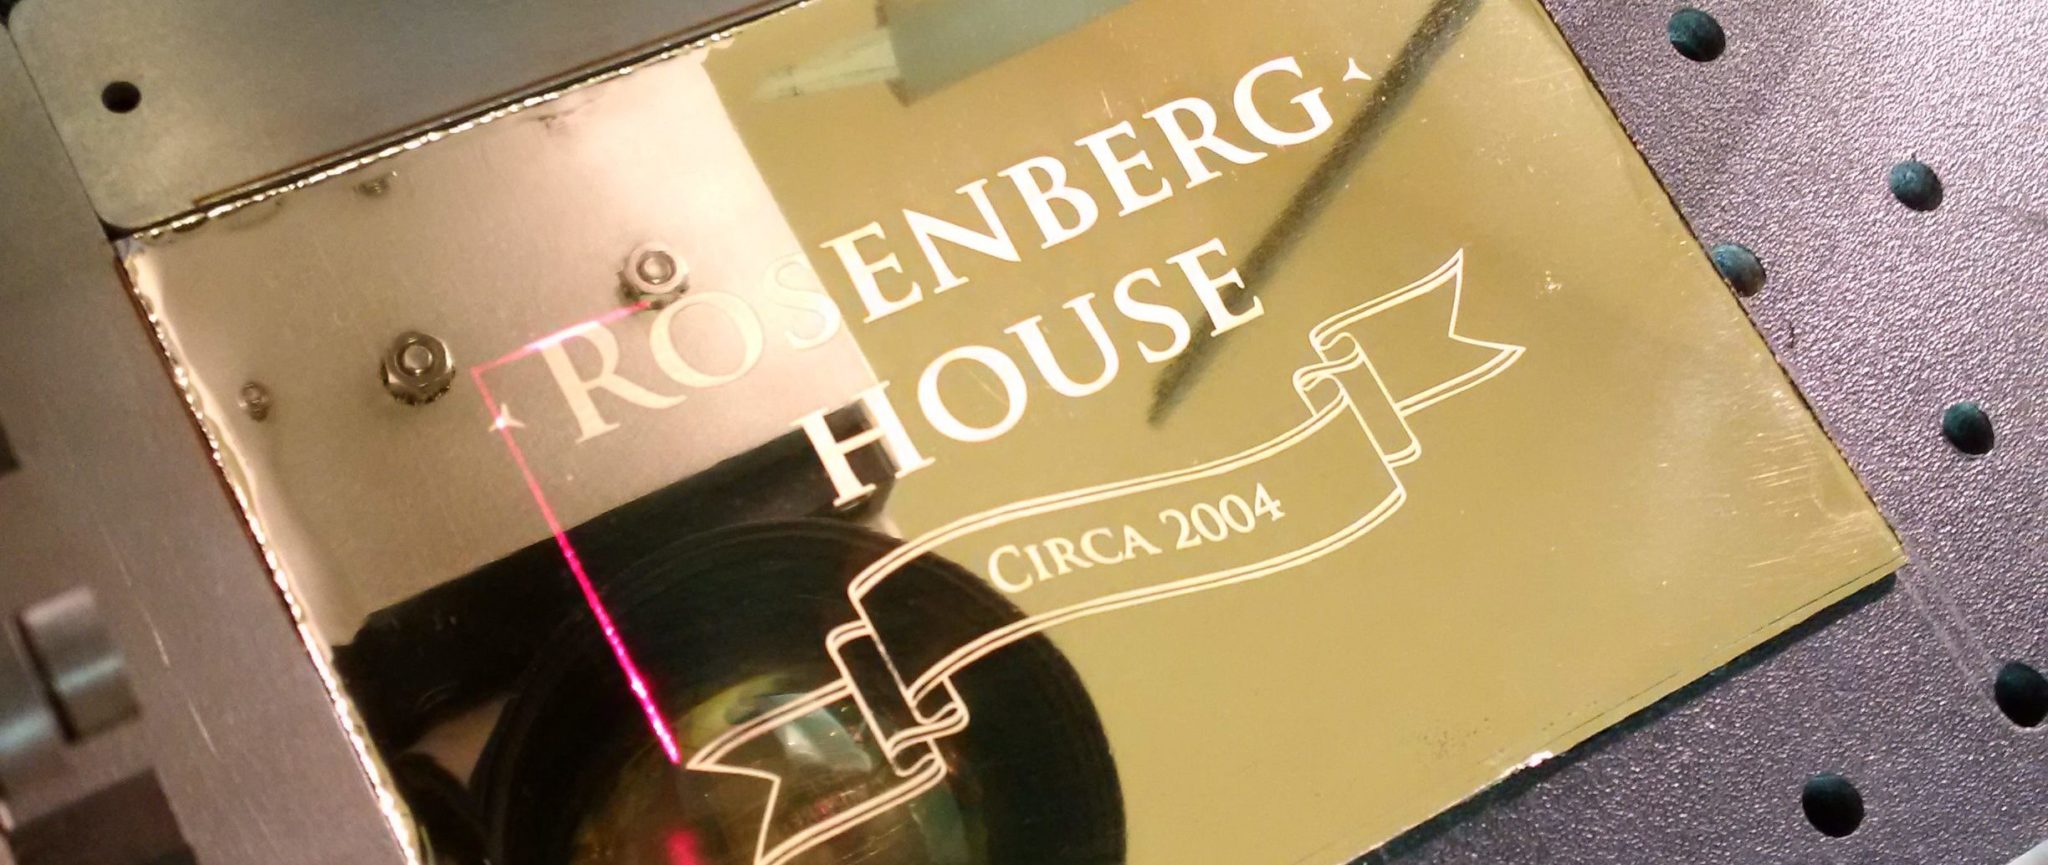 Engraved Metal Labels: Laser Etching Gold-Colored Metal. Engraving Reads "Rosenberg House Circa 2004" and is extremely neatly engraved.